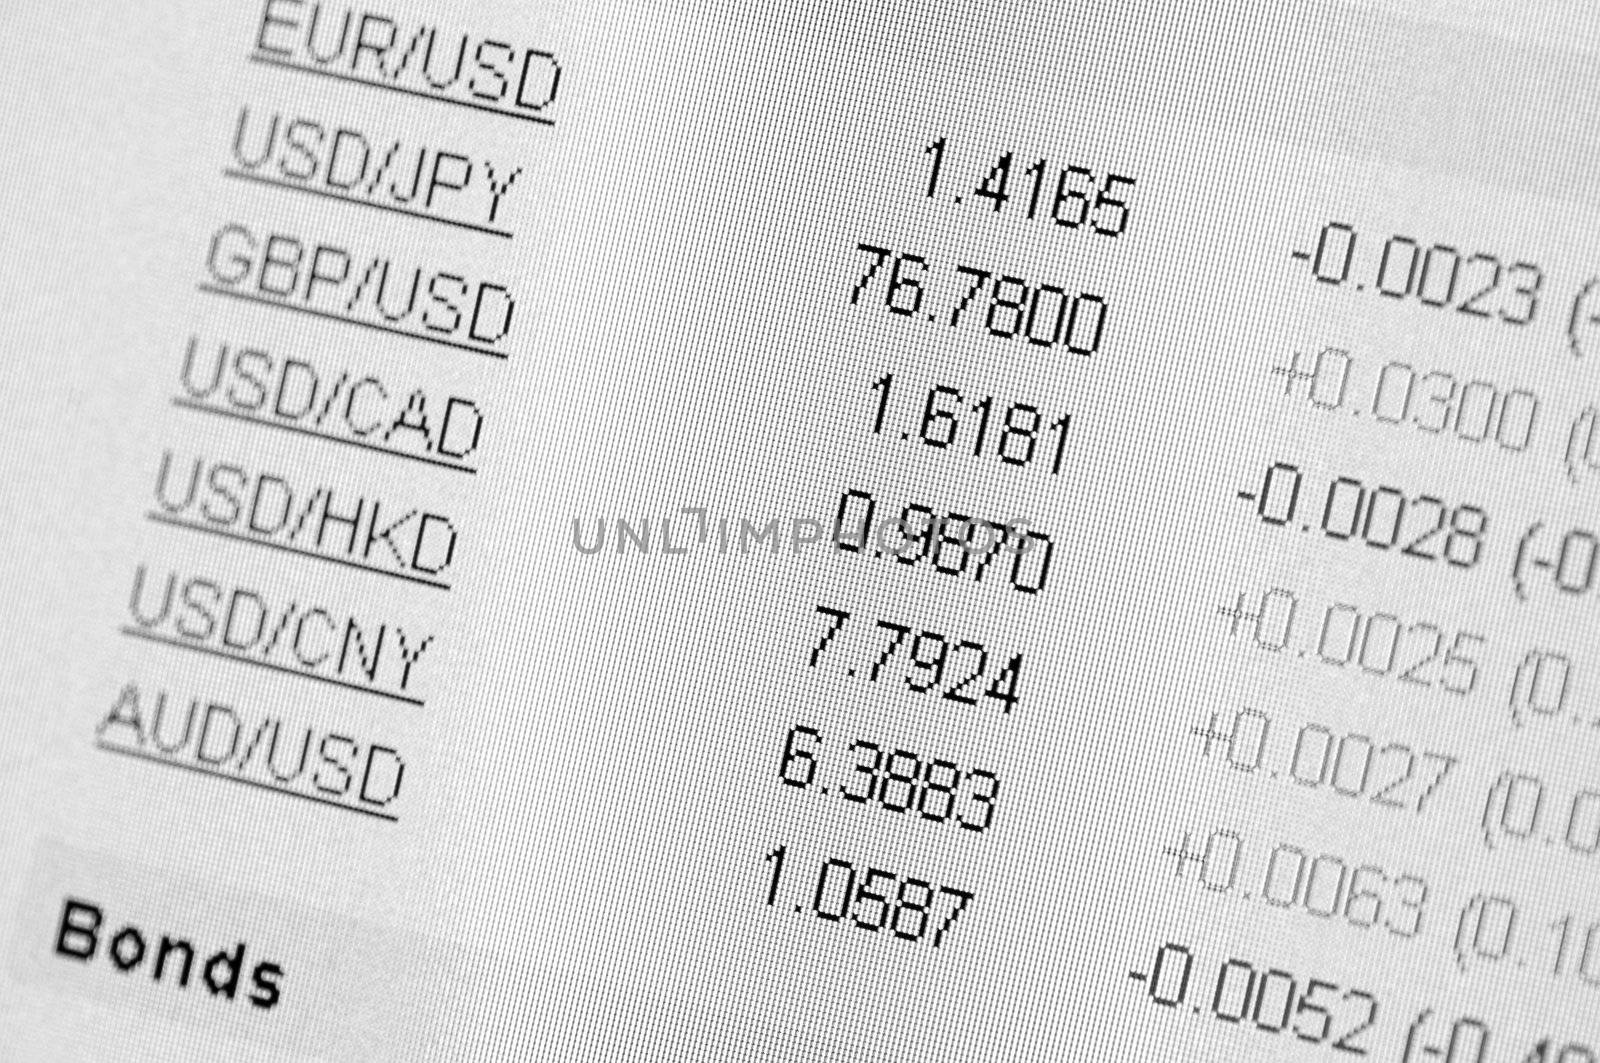 Exchange rates on the computer screen close-up.